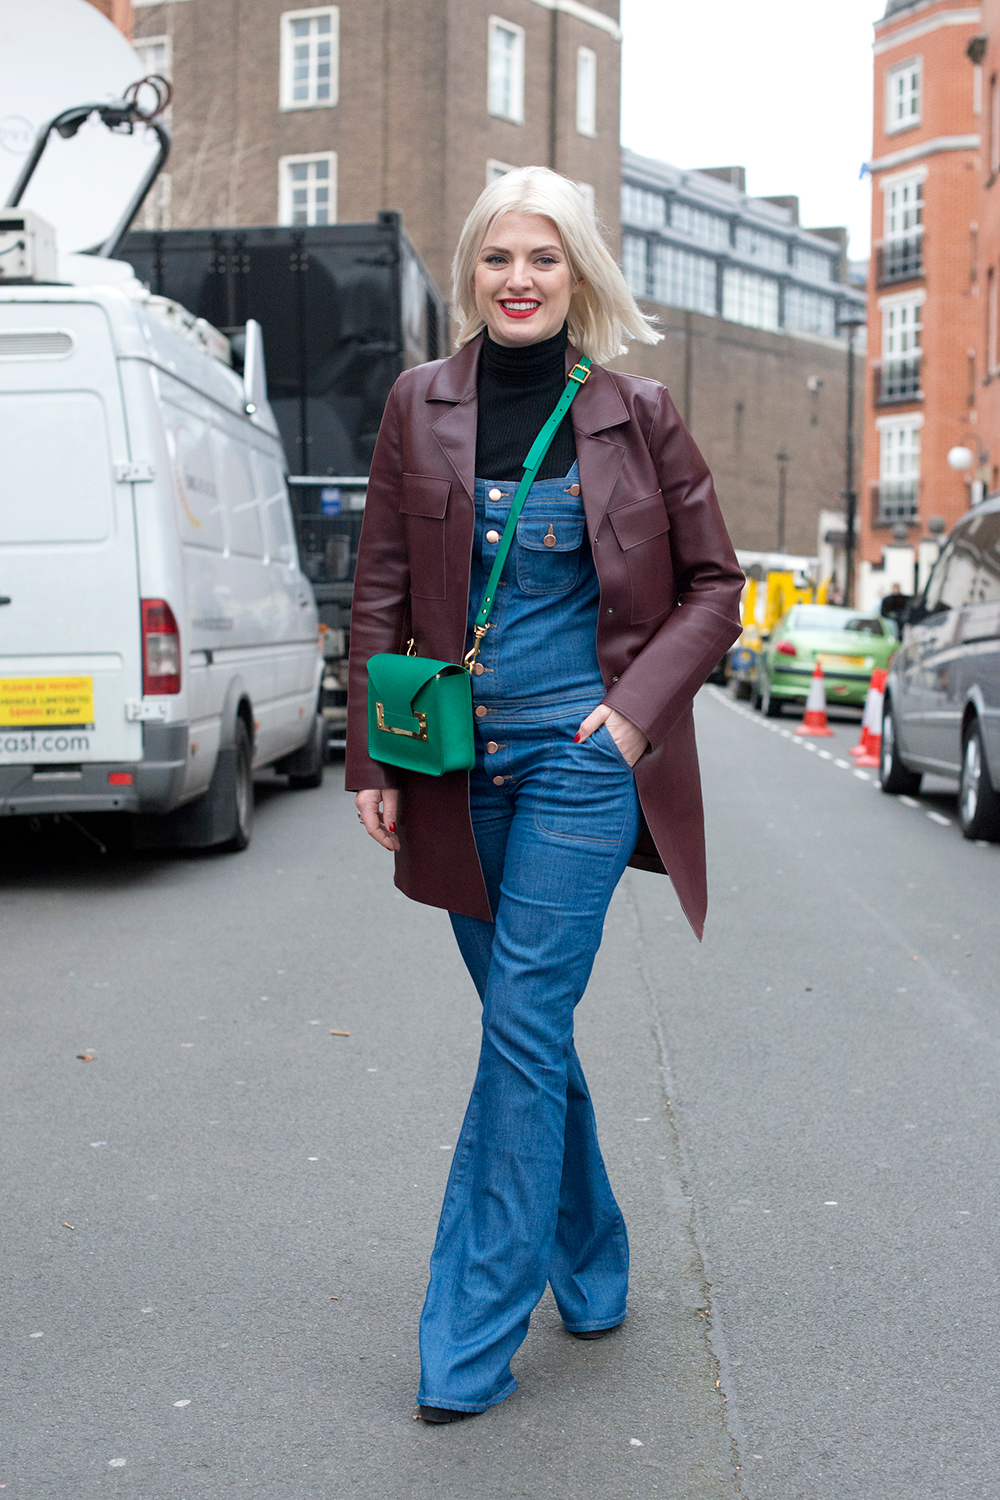 ES magazine's junior fashion editor Jenny Kennedy teams her MiH overalls with Zara jacket, Zara shoes and Sophie Hulme bag. Photo / Getty Images